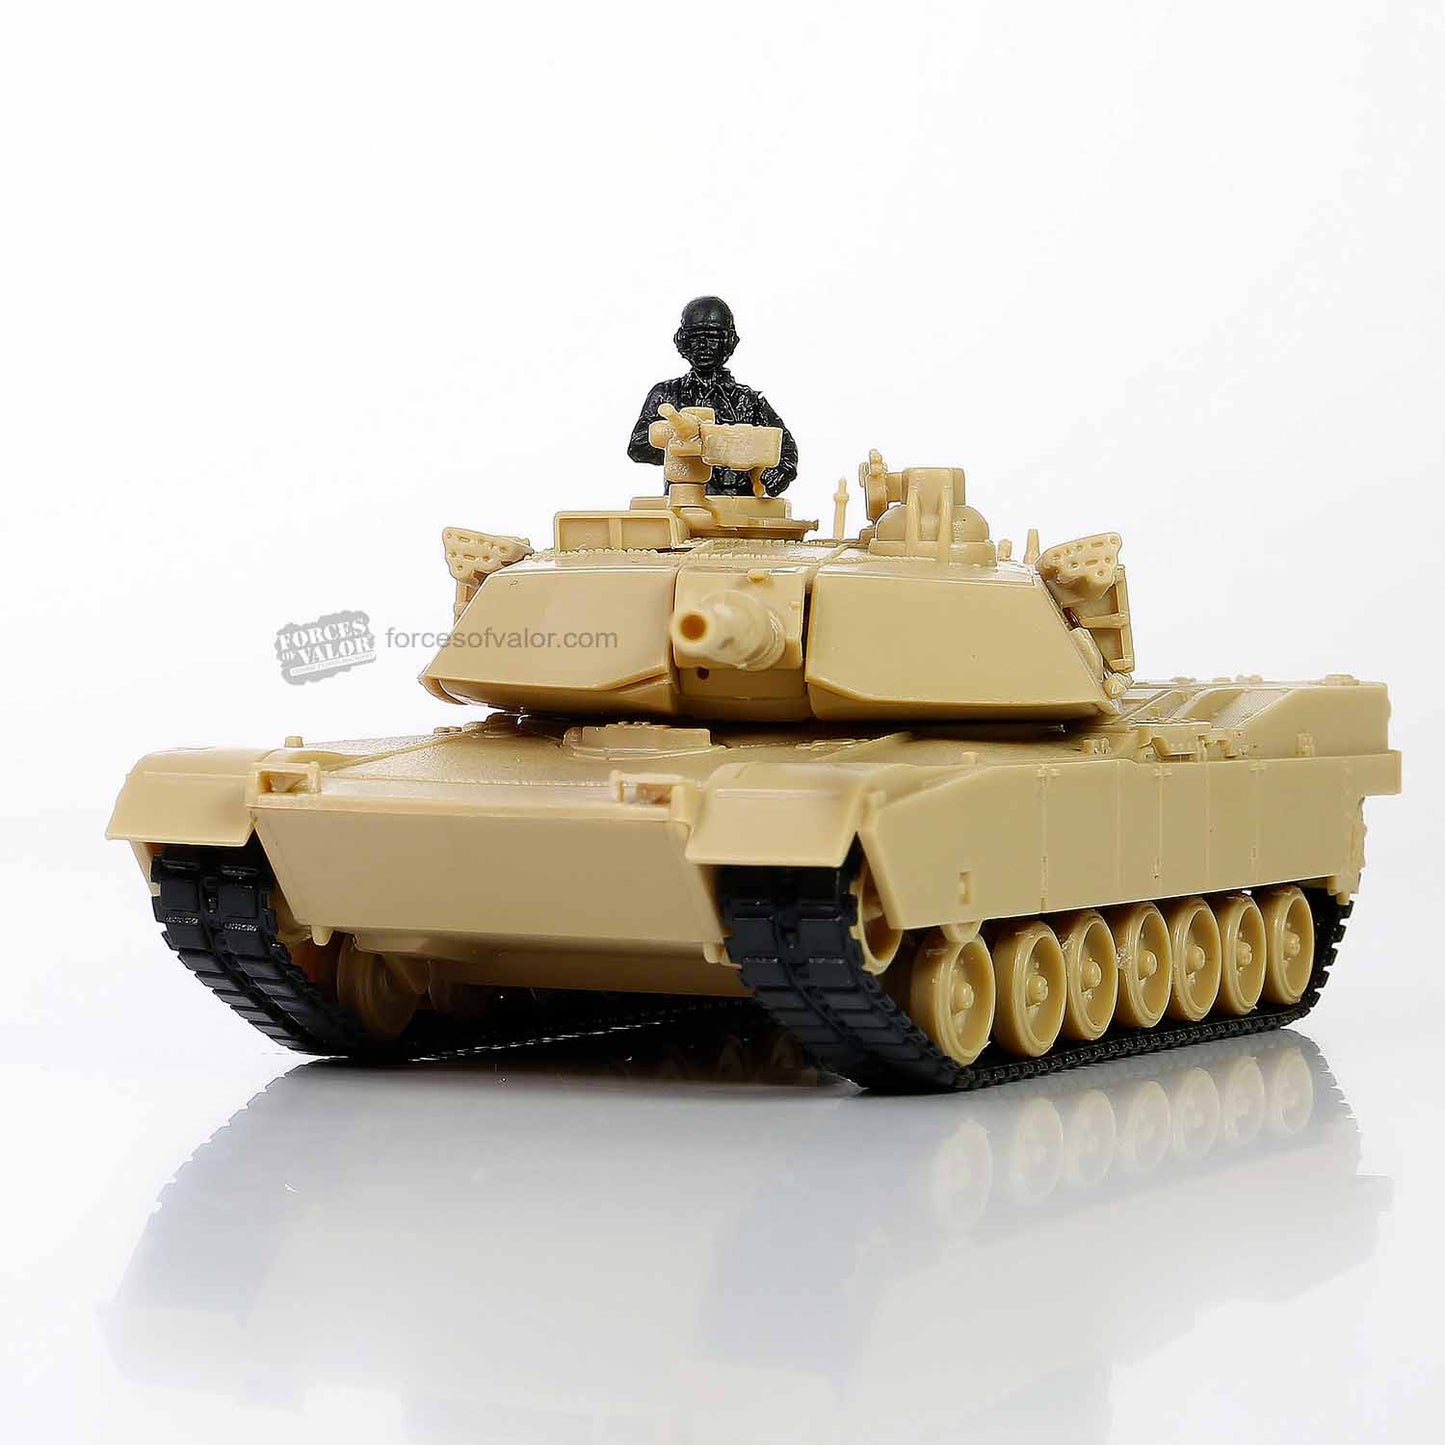 Forces Of Valor 1/72 Scale Kit U.S M1A2 Abrams Tank - Iraq 2003